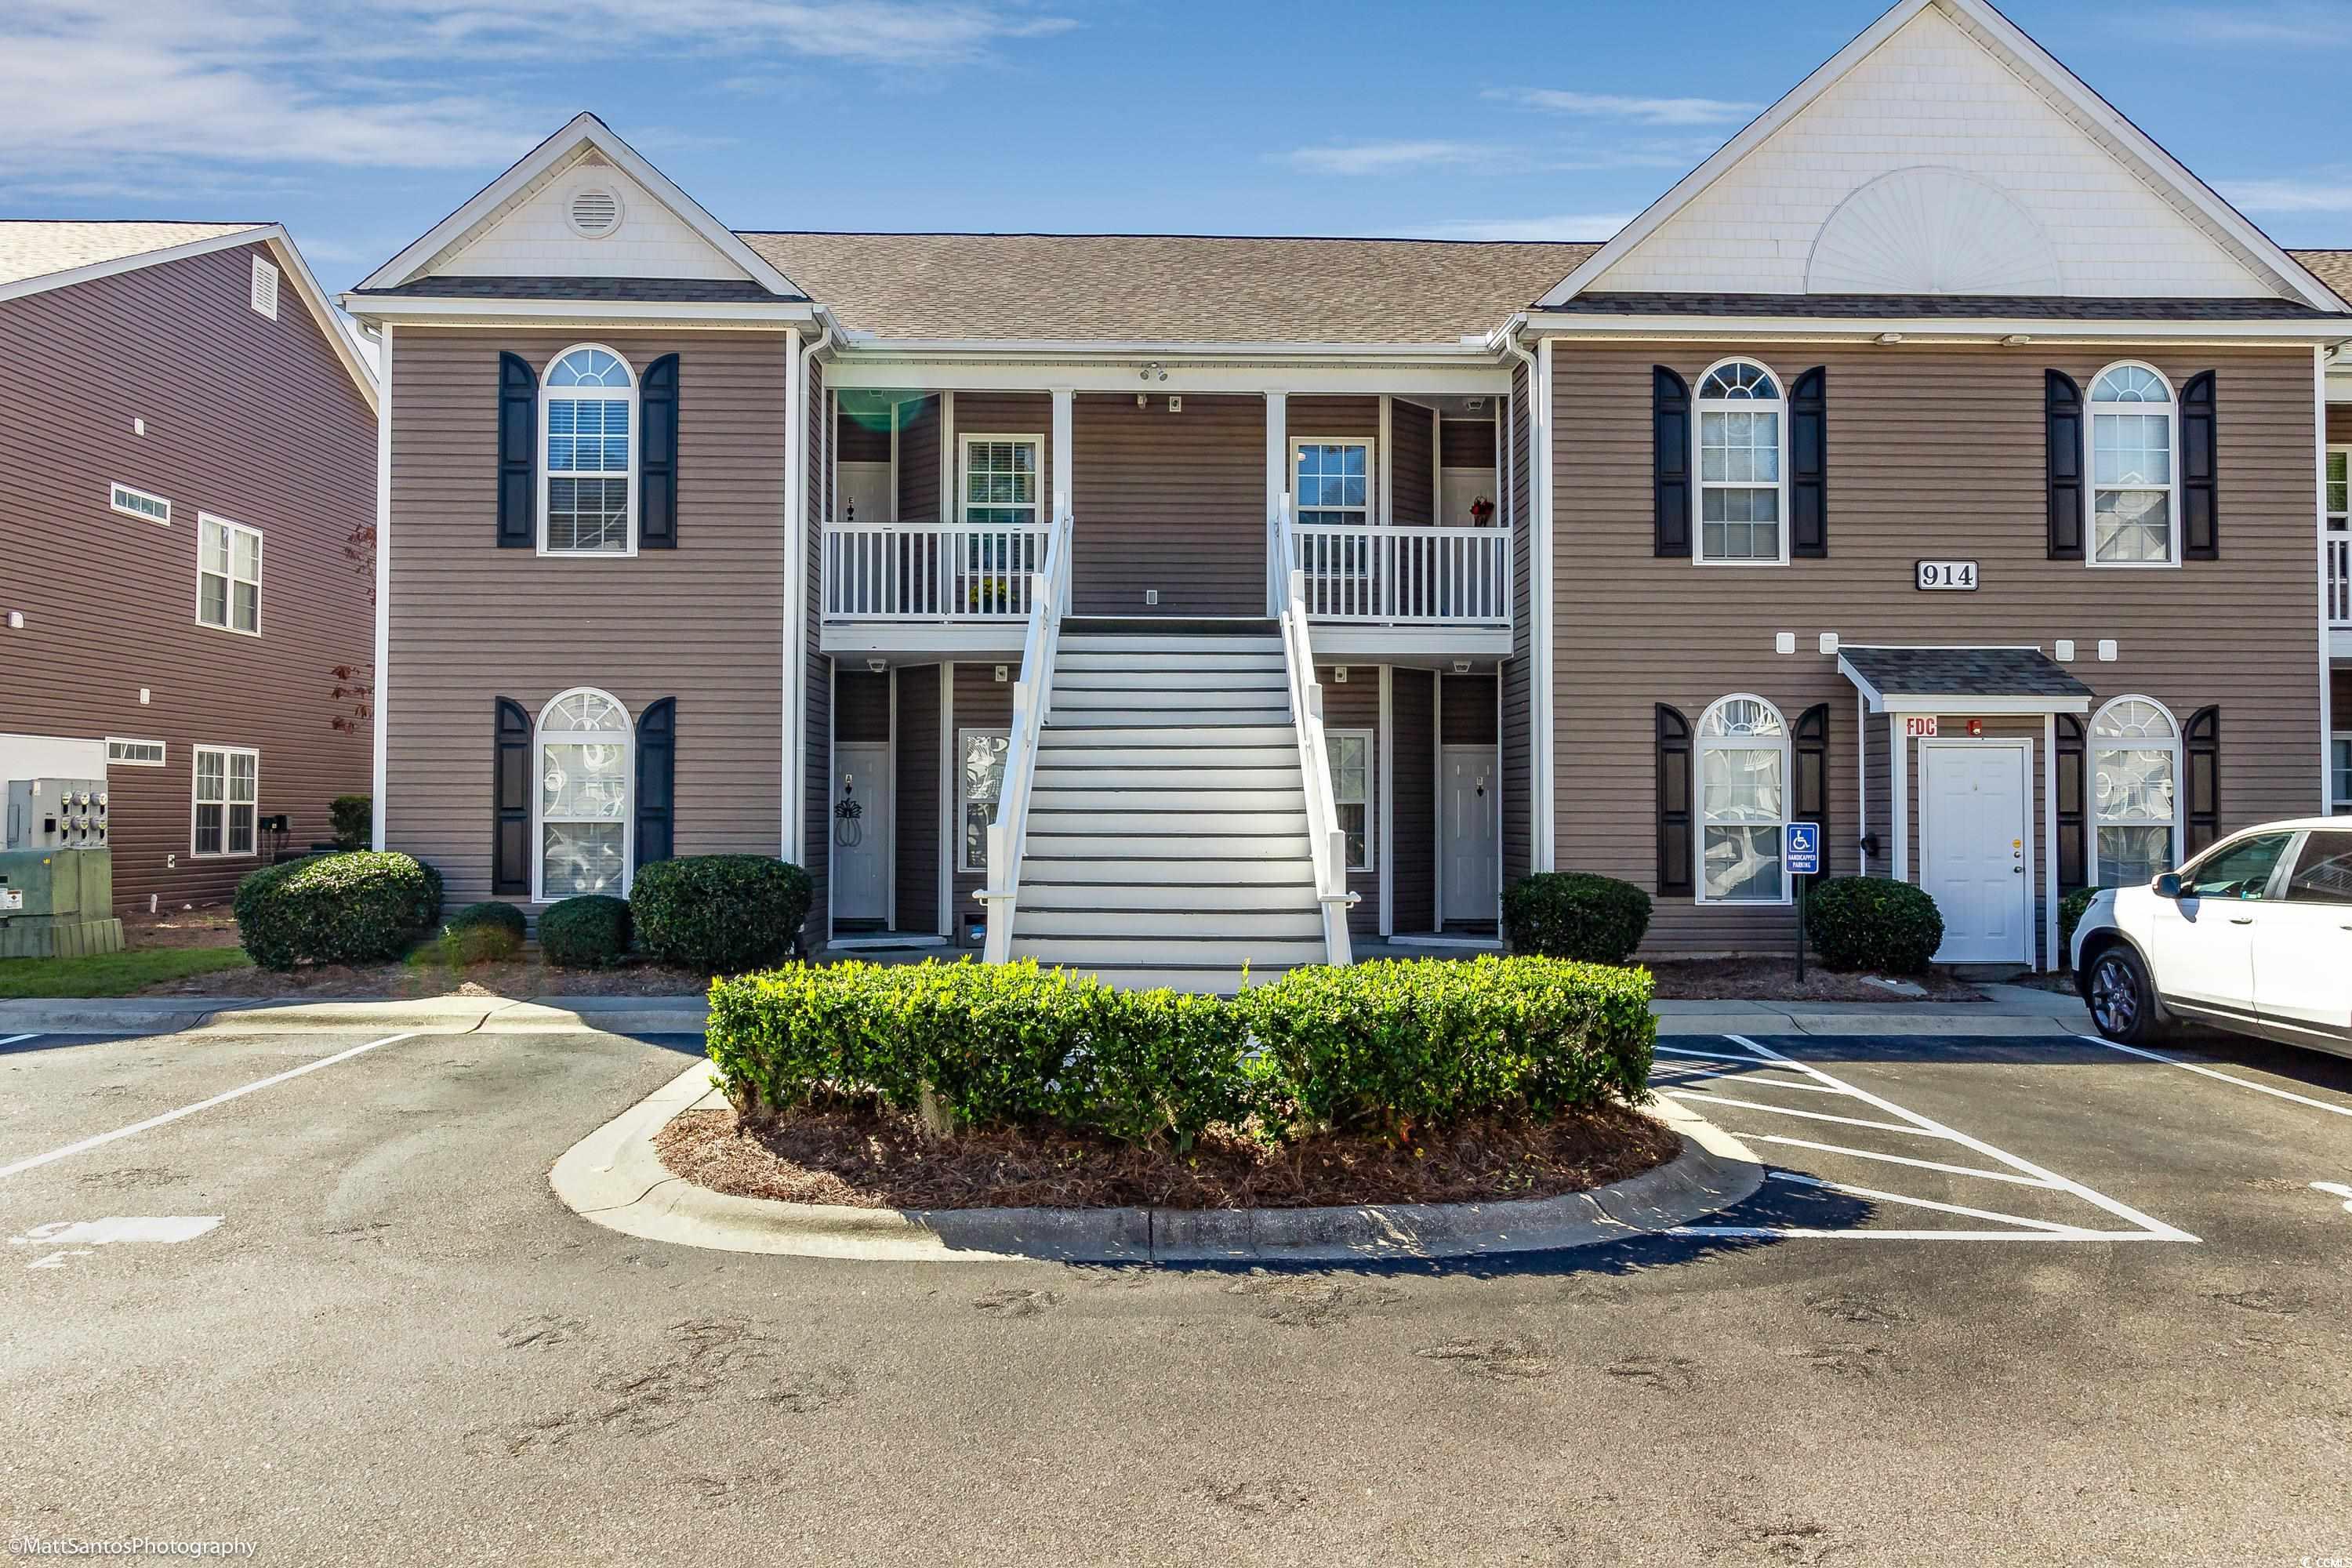 3 bedroom/2 bathroom condo in one of the few gated condominium neighborhoods in pawleys island. great location to the beach, and easy access to the local shopping and restaurants, as well as golf courses.  living here gives you a quick walk to stables park where you can enjoy the walking and biking trails, disc golf and the playing fields.  this quiet neighborhood is a hidden gem, with gated access and community pool. this upstairs unit has a front porch area with morning sun. the interior is decorated with cheerful colors and wonderful vaulted ceilings!! the kitchen has a breakfast counter for casual seating; stainless steel appliances; granite counter tops; under cabinets sensor lights and wait until you open the cabinets! there are pull-outs in the kitchen and bathroom as well as fan timers in the bathrooms. there are two bedrooms at the front of the home- one has a pocket door so the the bedroom and bathroom can become a private suite for guests. the primary bedroom is at the other side of the house and has two closets, one being a walk-in closet. the screened-in porch is great for relaxing, and for the sunny afternoon, there are blinds and a ceiling fan. light and bright inside the home!! this home is well-maintained, clean and ready for its new owner. new roof 2023, new hvac 2018. this condo is just steps to the community pool and just a couple miles from litchfield beach. living in pawleys island gives you the opportunity to get to charleston in just over an hour, and myrtle beach is just 40 minutes north. this is a chance at true beach and golf living and perfect for full-time or part-time!